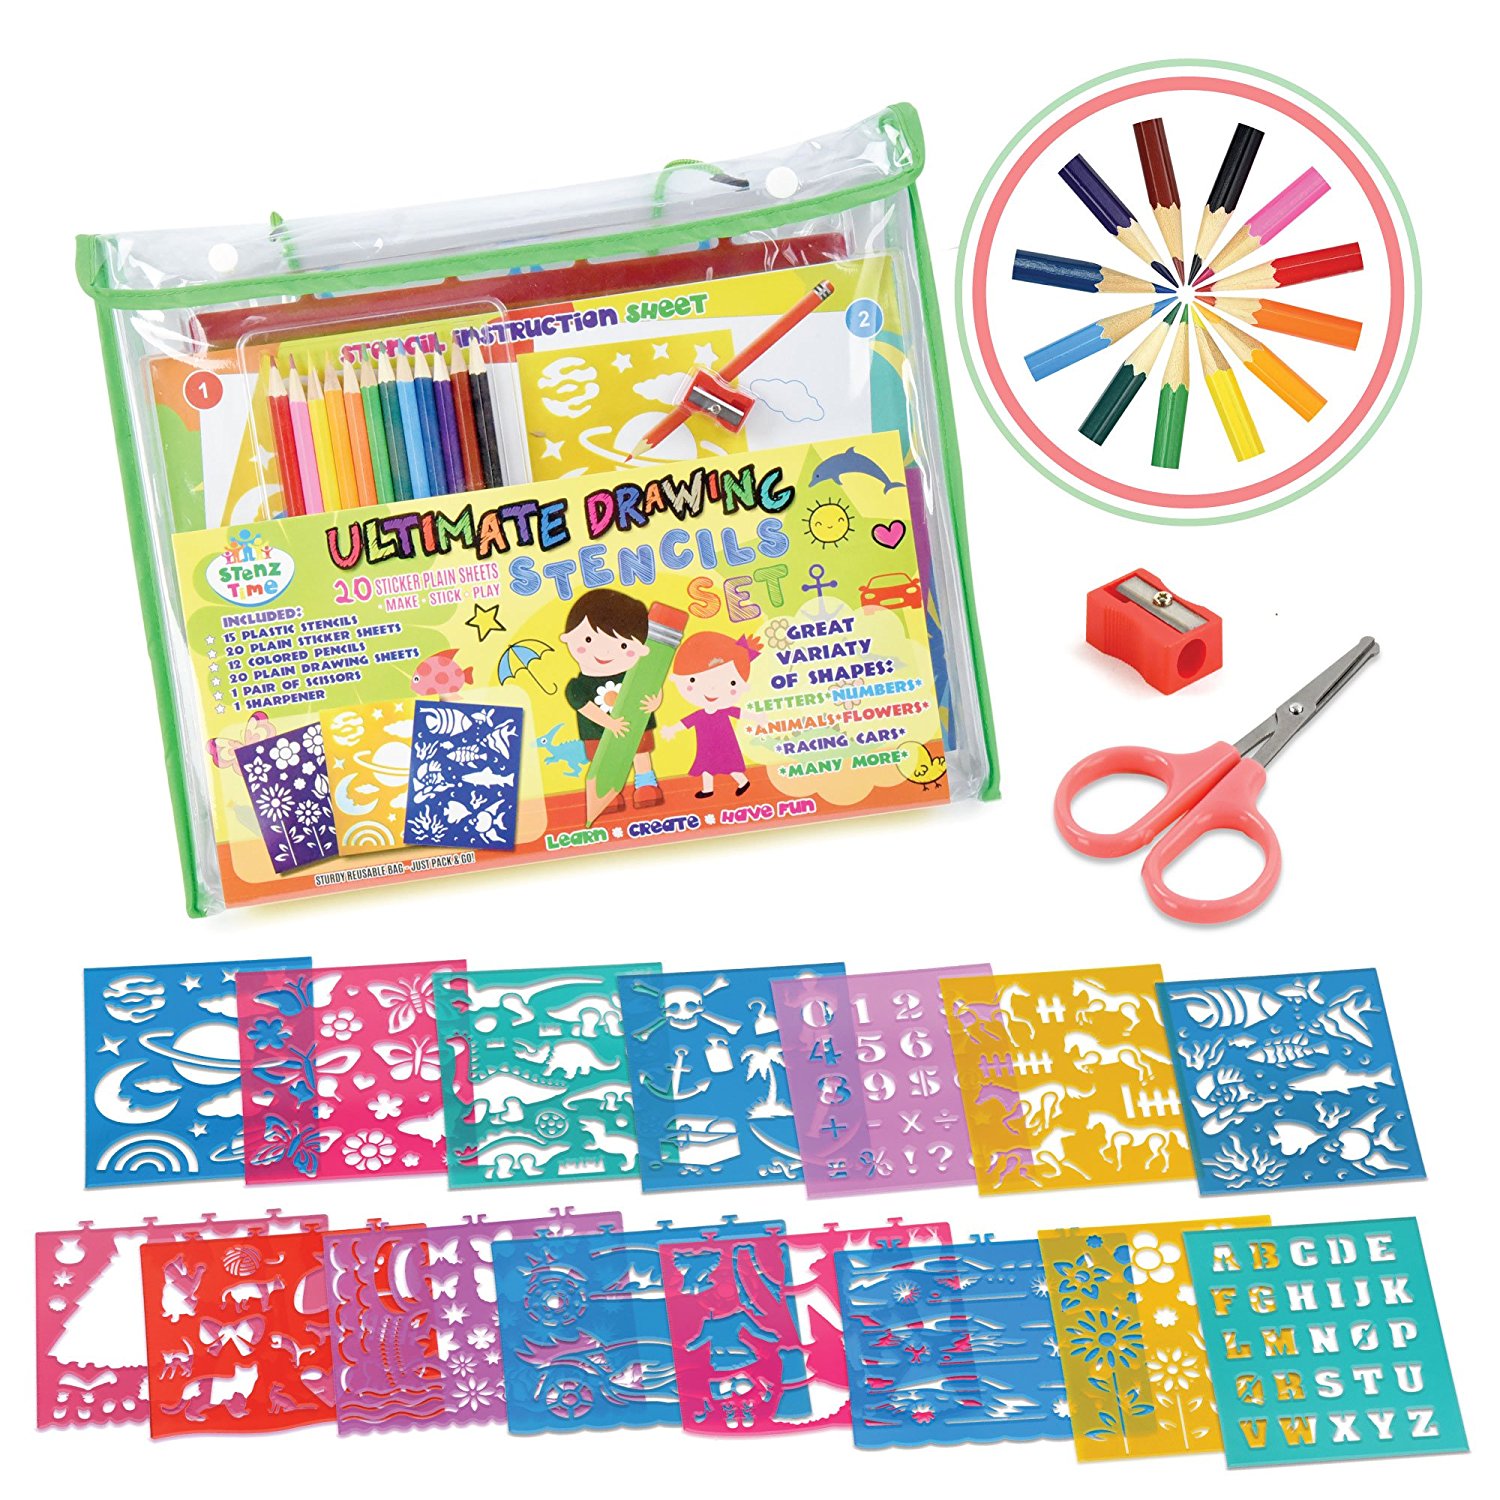 STENZTIME Ultimate Stencil Set | Large 70 Piece Stencil Drawing Kit and Over 260 Shapes | Ideal Educational Toy and Creativity Kit |The Perfect Kids Gift for any occasion!